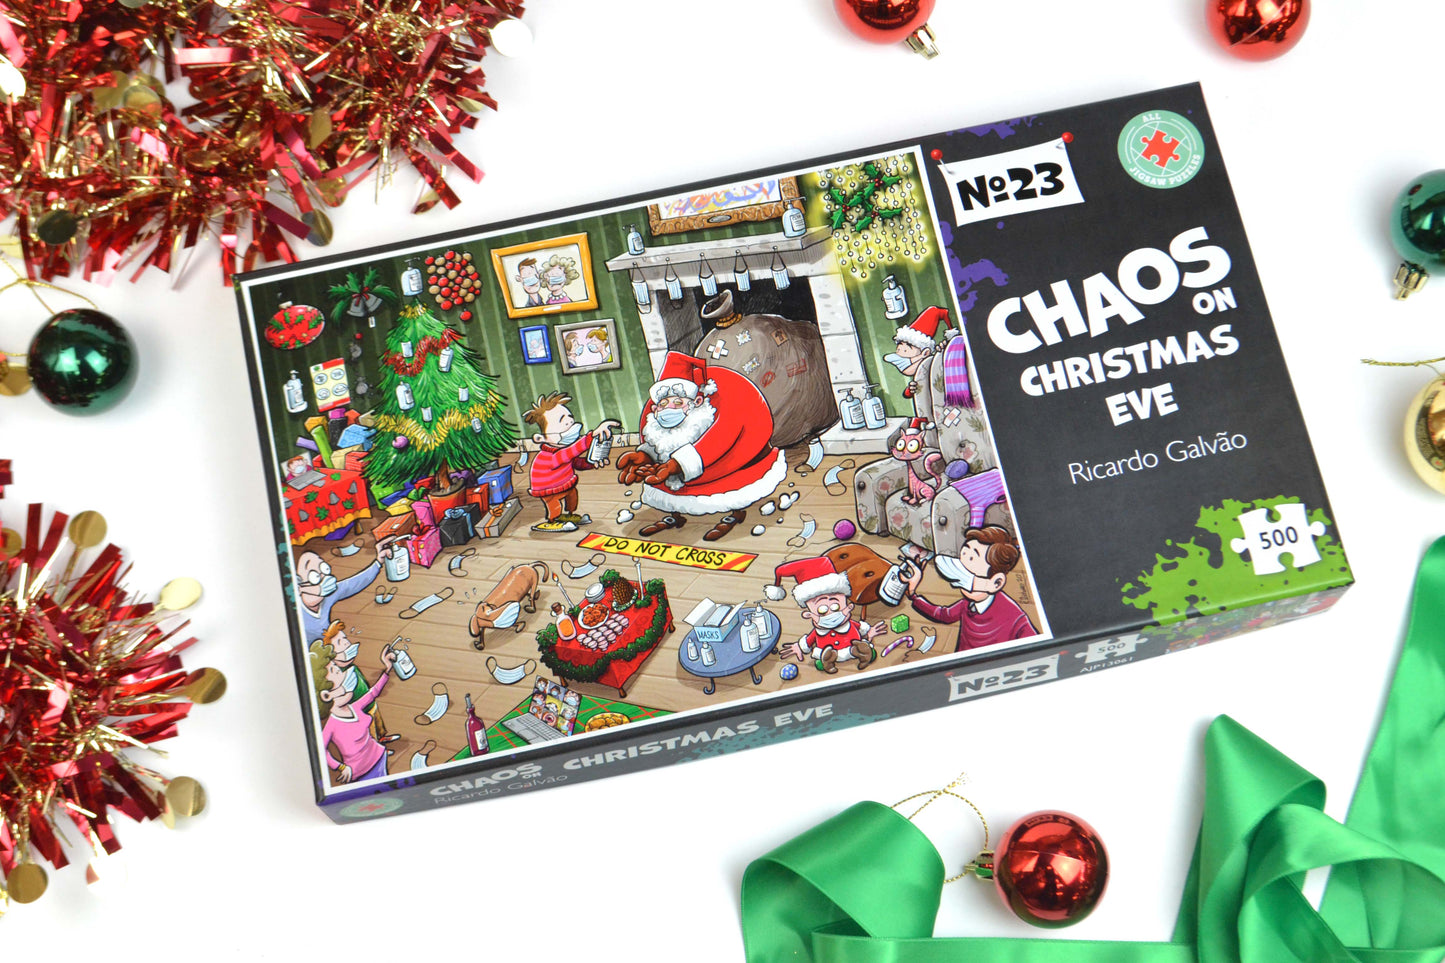 Chaos on Christmas Eve 1000  or 500 Piece Jigsaw Puzzle - Chaos no. 23